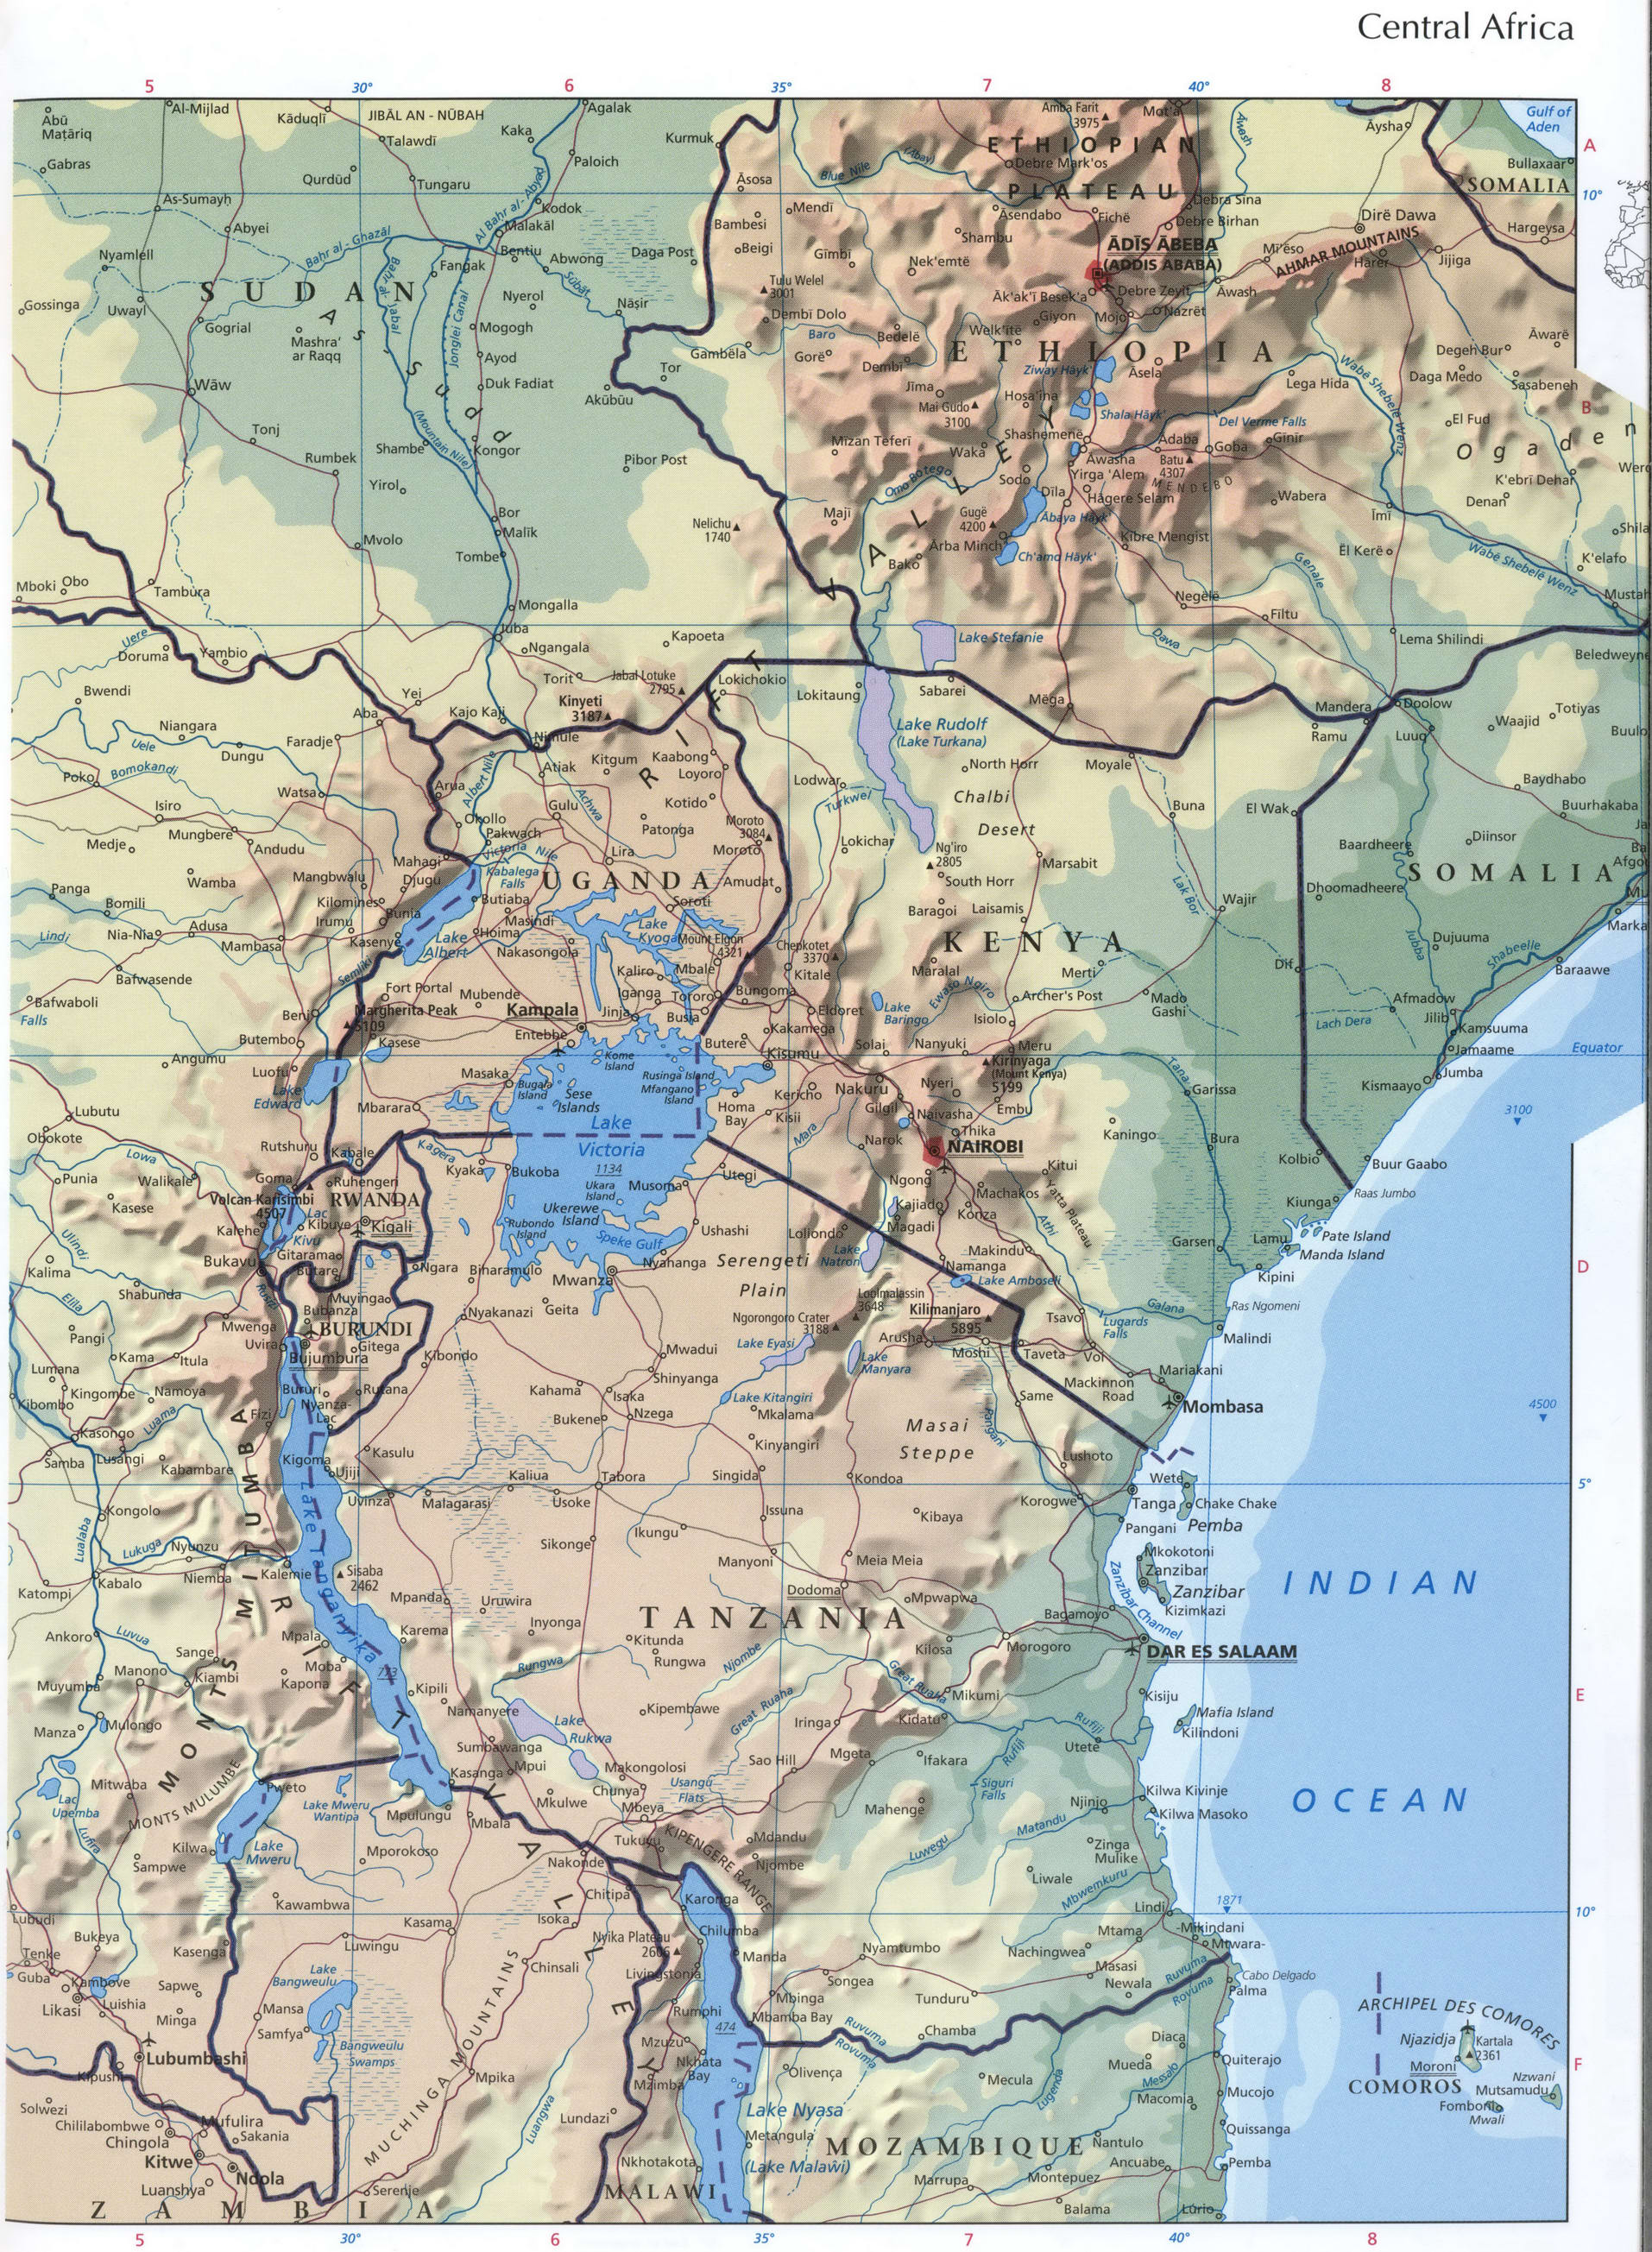 Central Africa map detailed